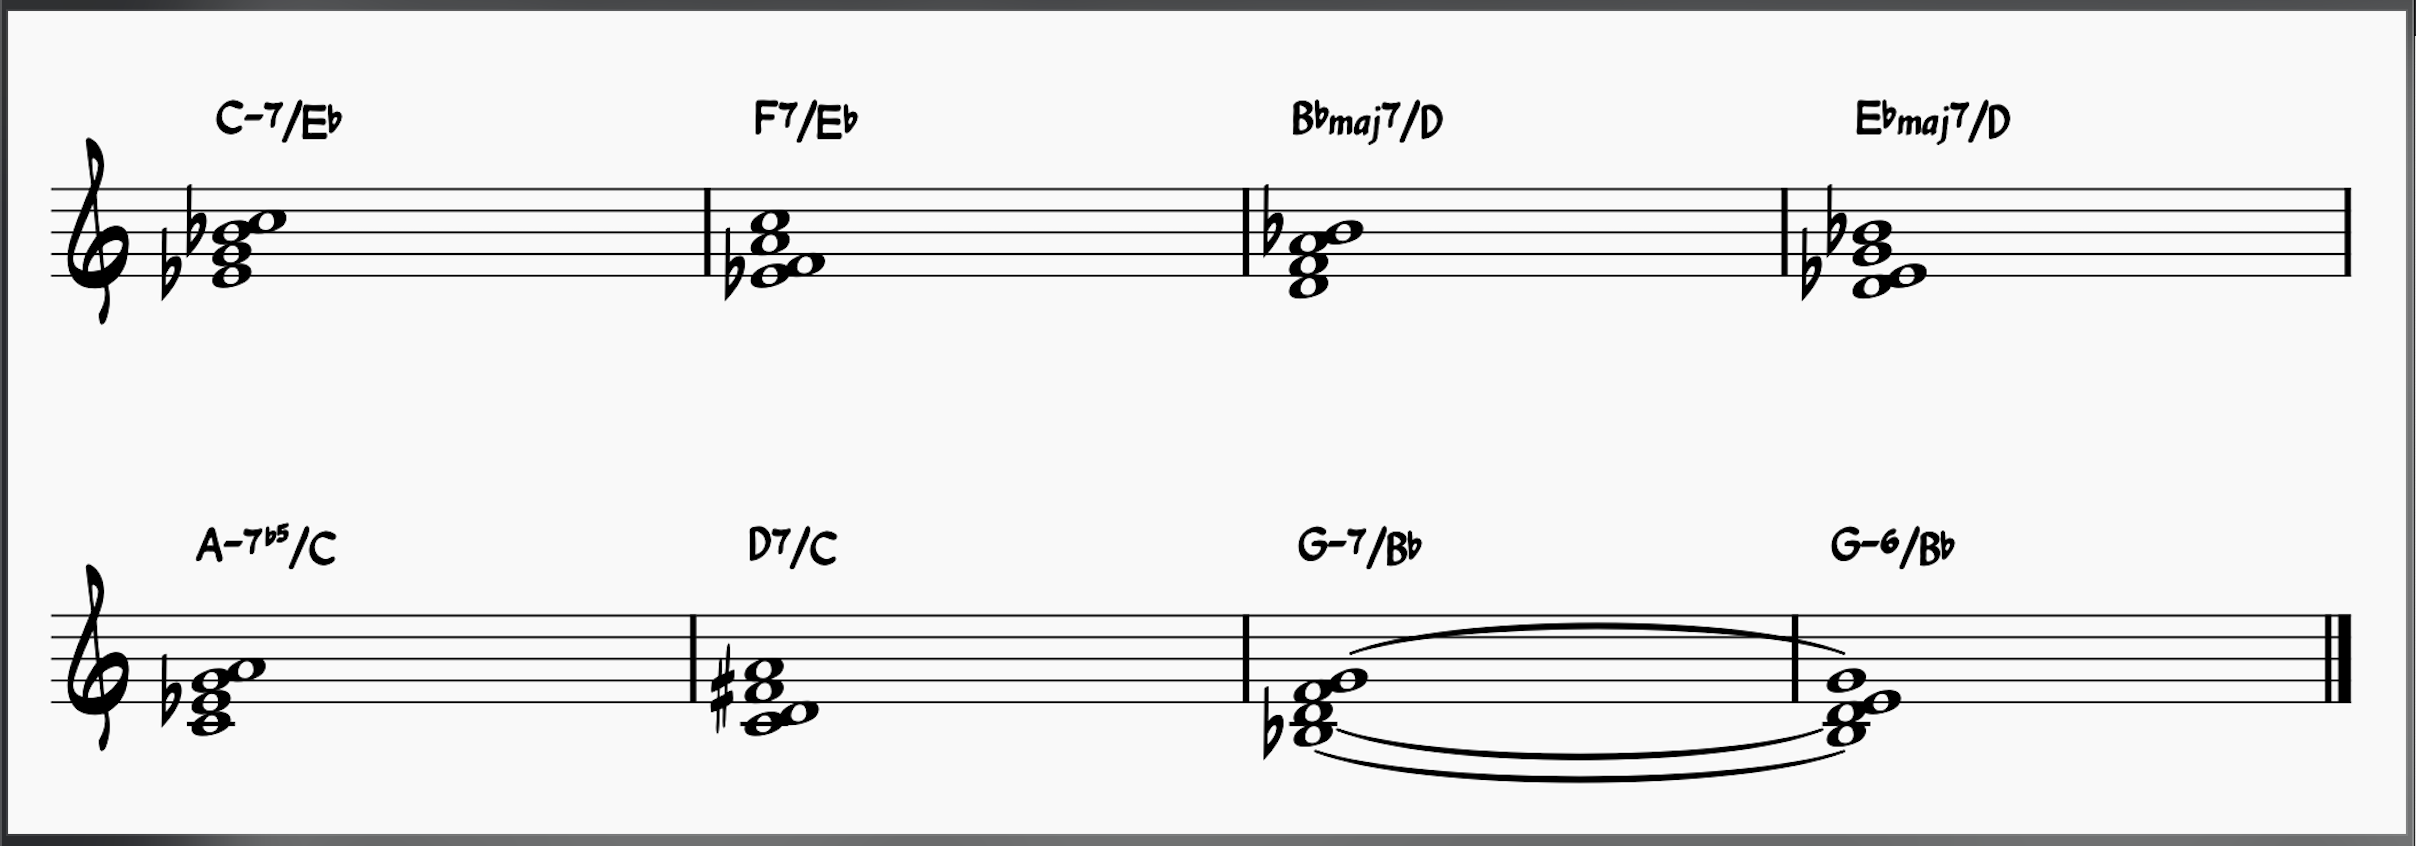 First 8 measures of Autumn Leaves with inverted chords